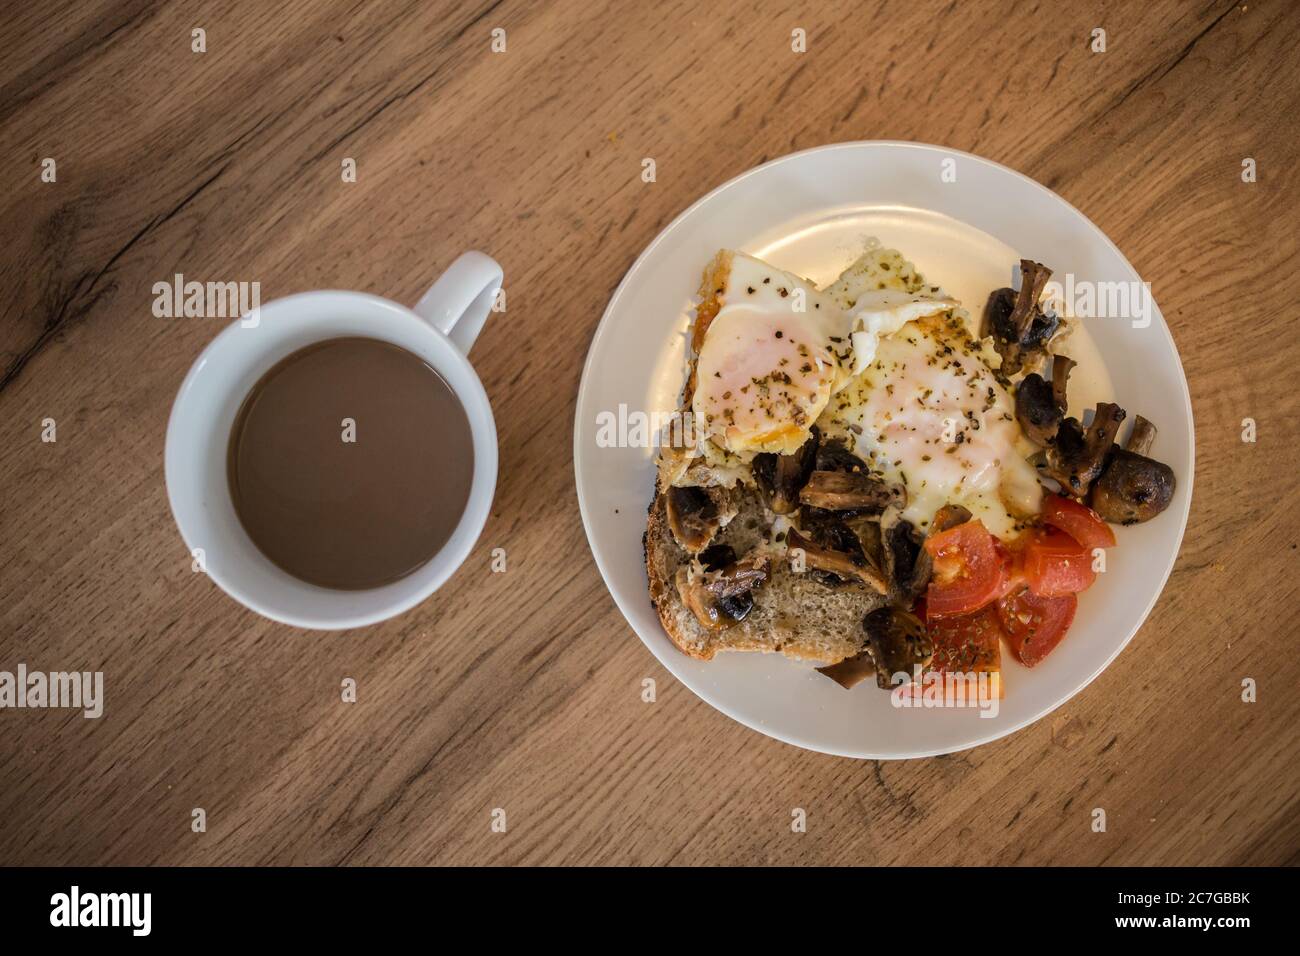 Breakfast plate with egg, toast and coffee Stock Photo